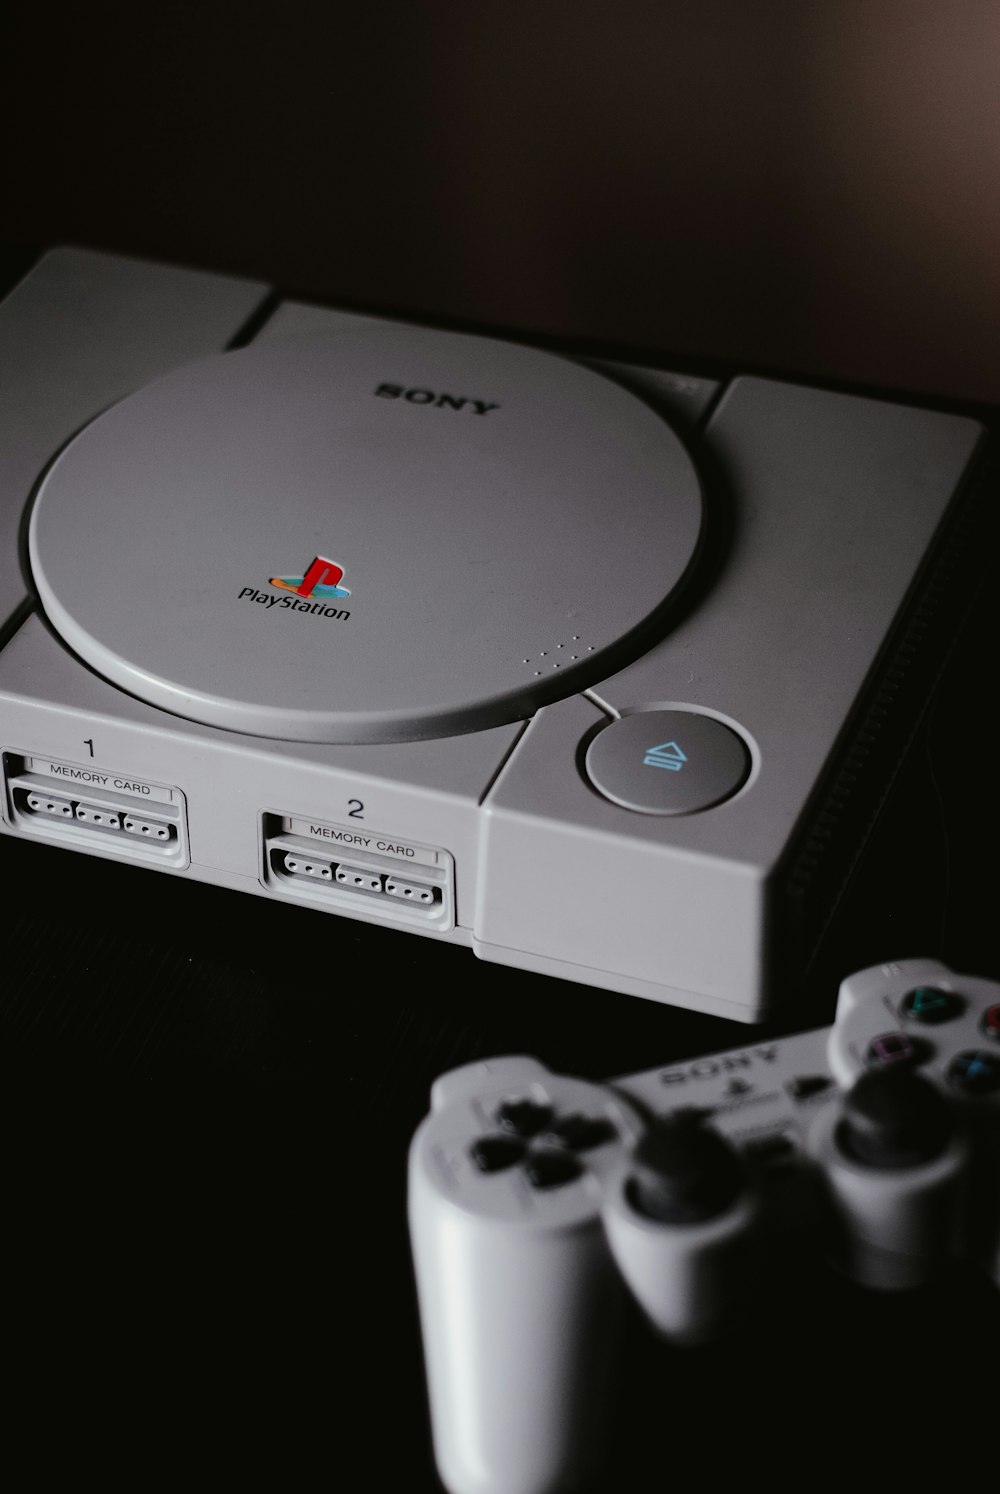 Playstation 1 Pictures | Download Free Images on Unsplash